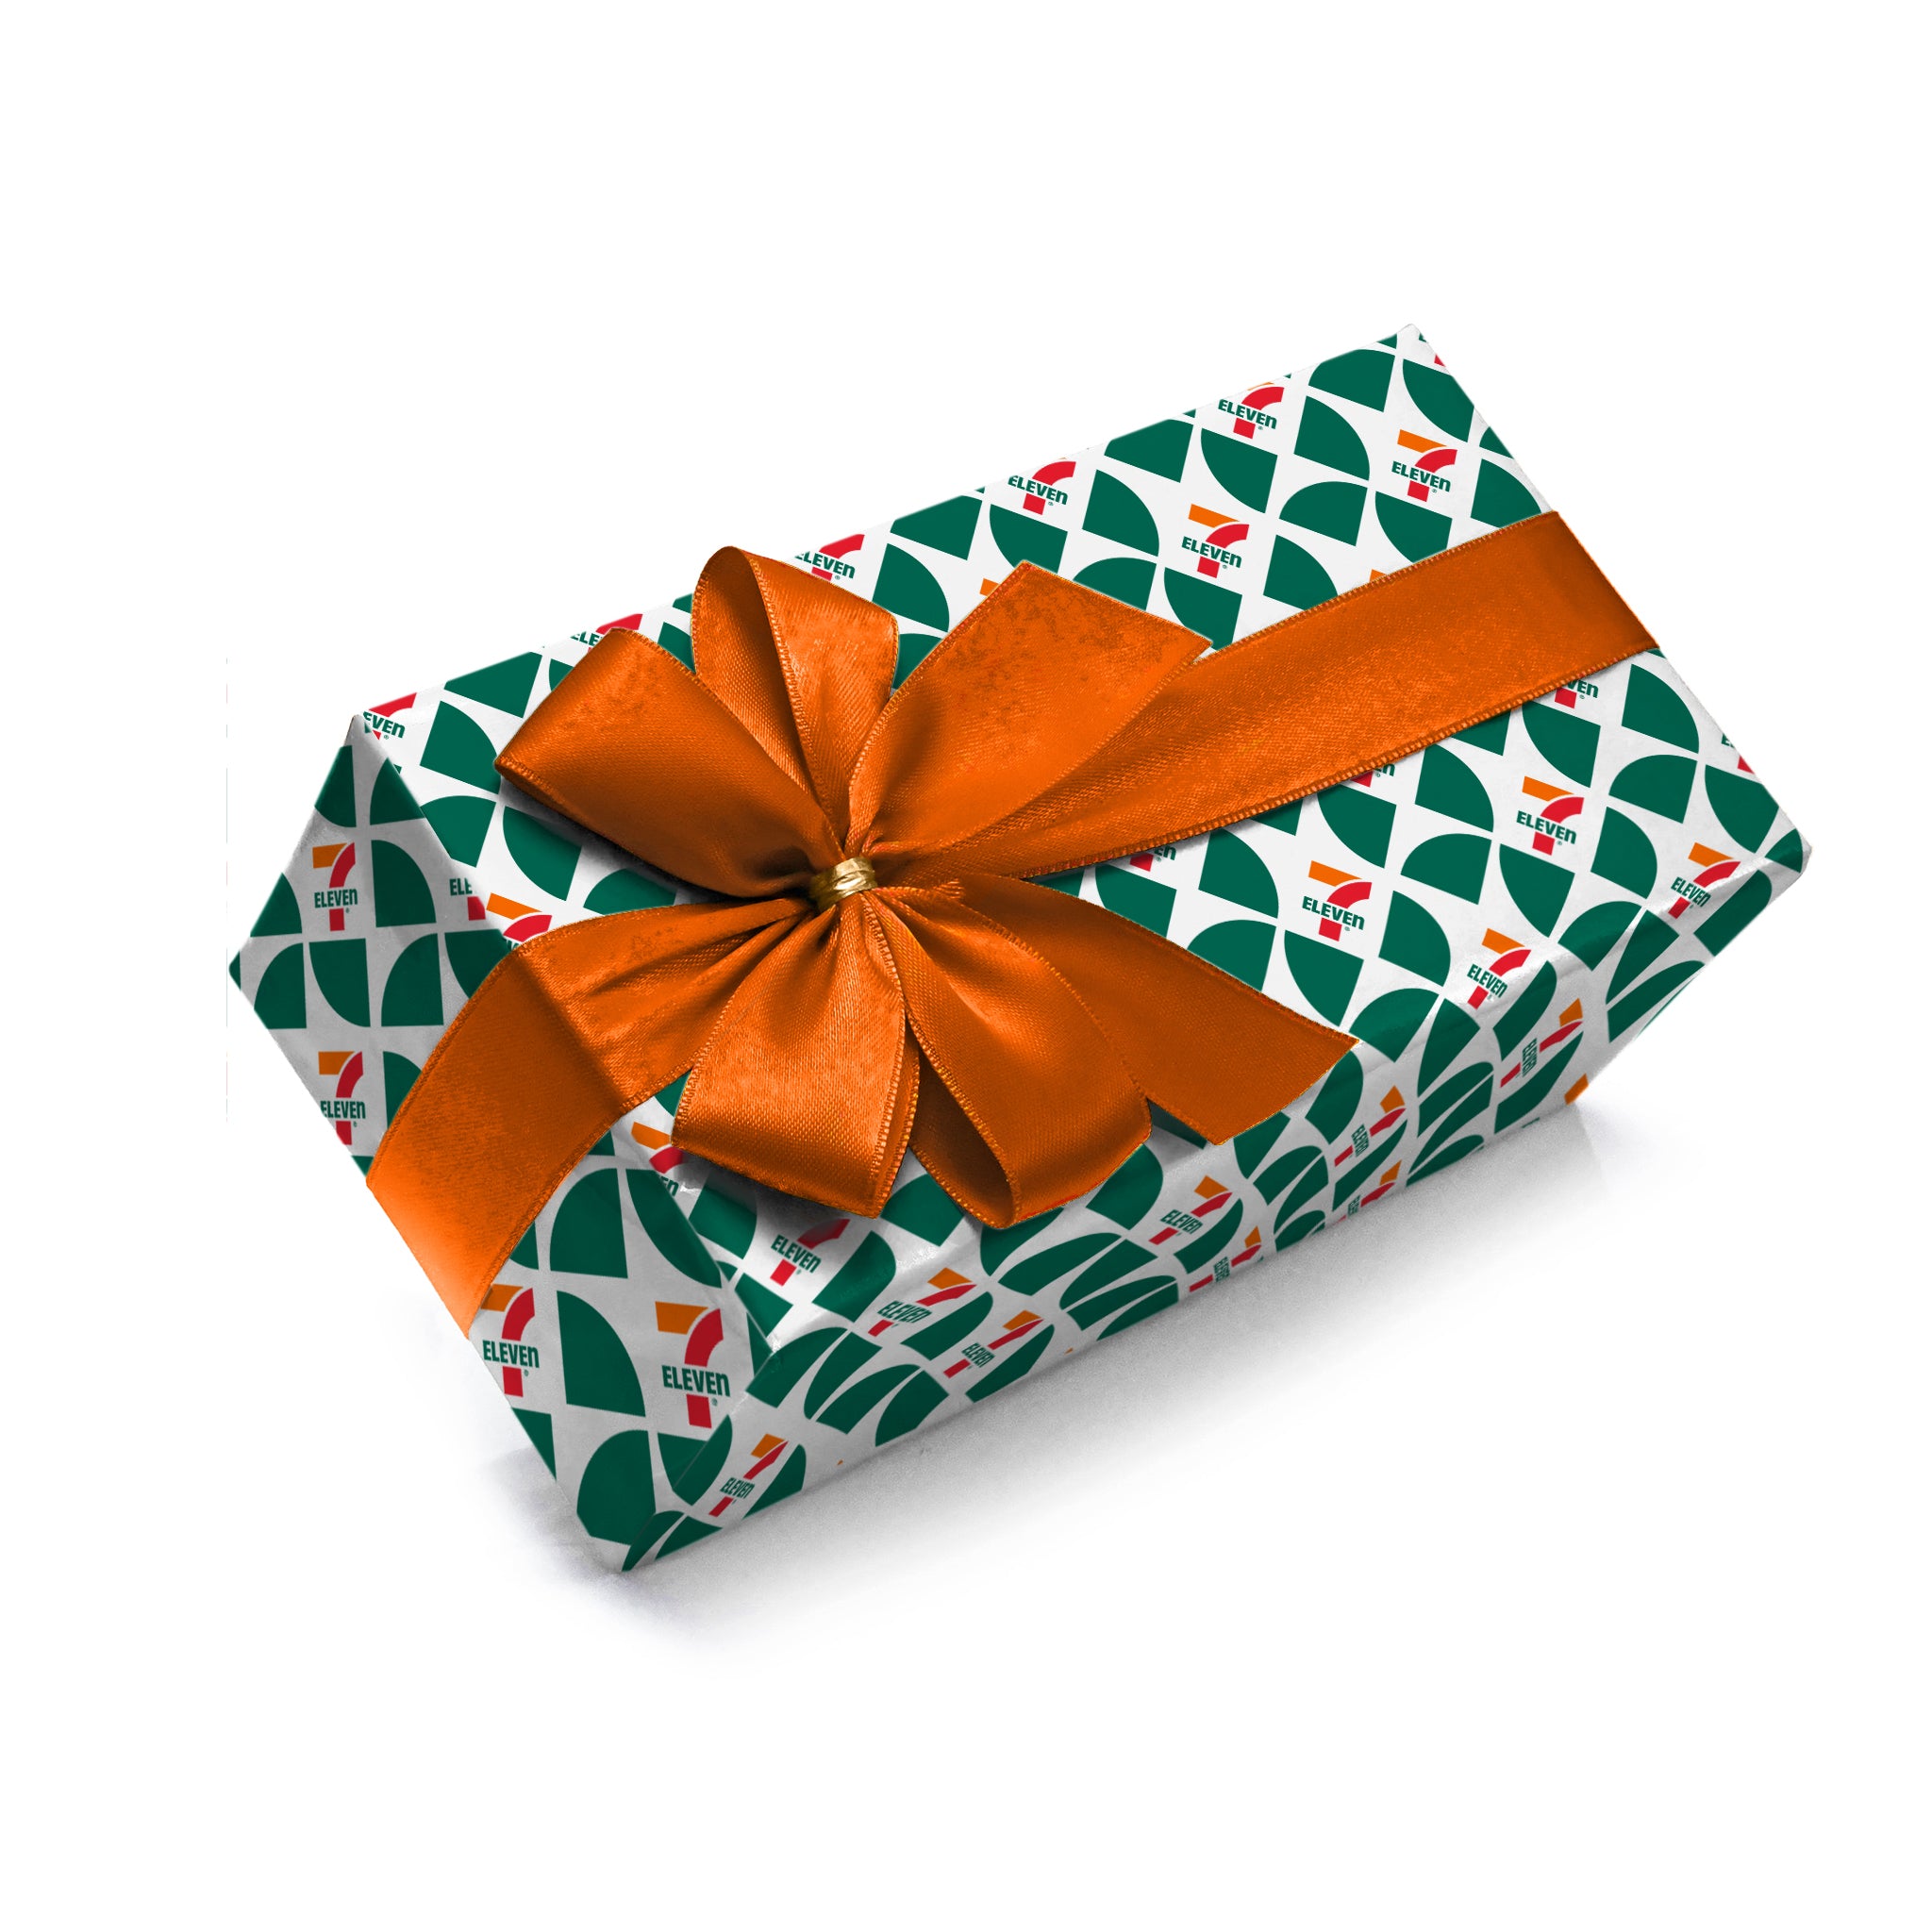 4 Ways to Make a Gift Box - wikiHow